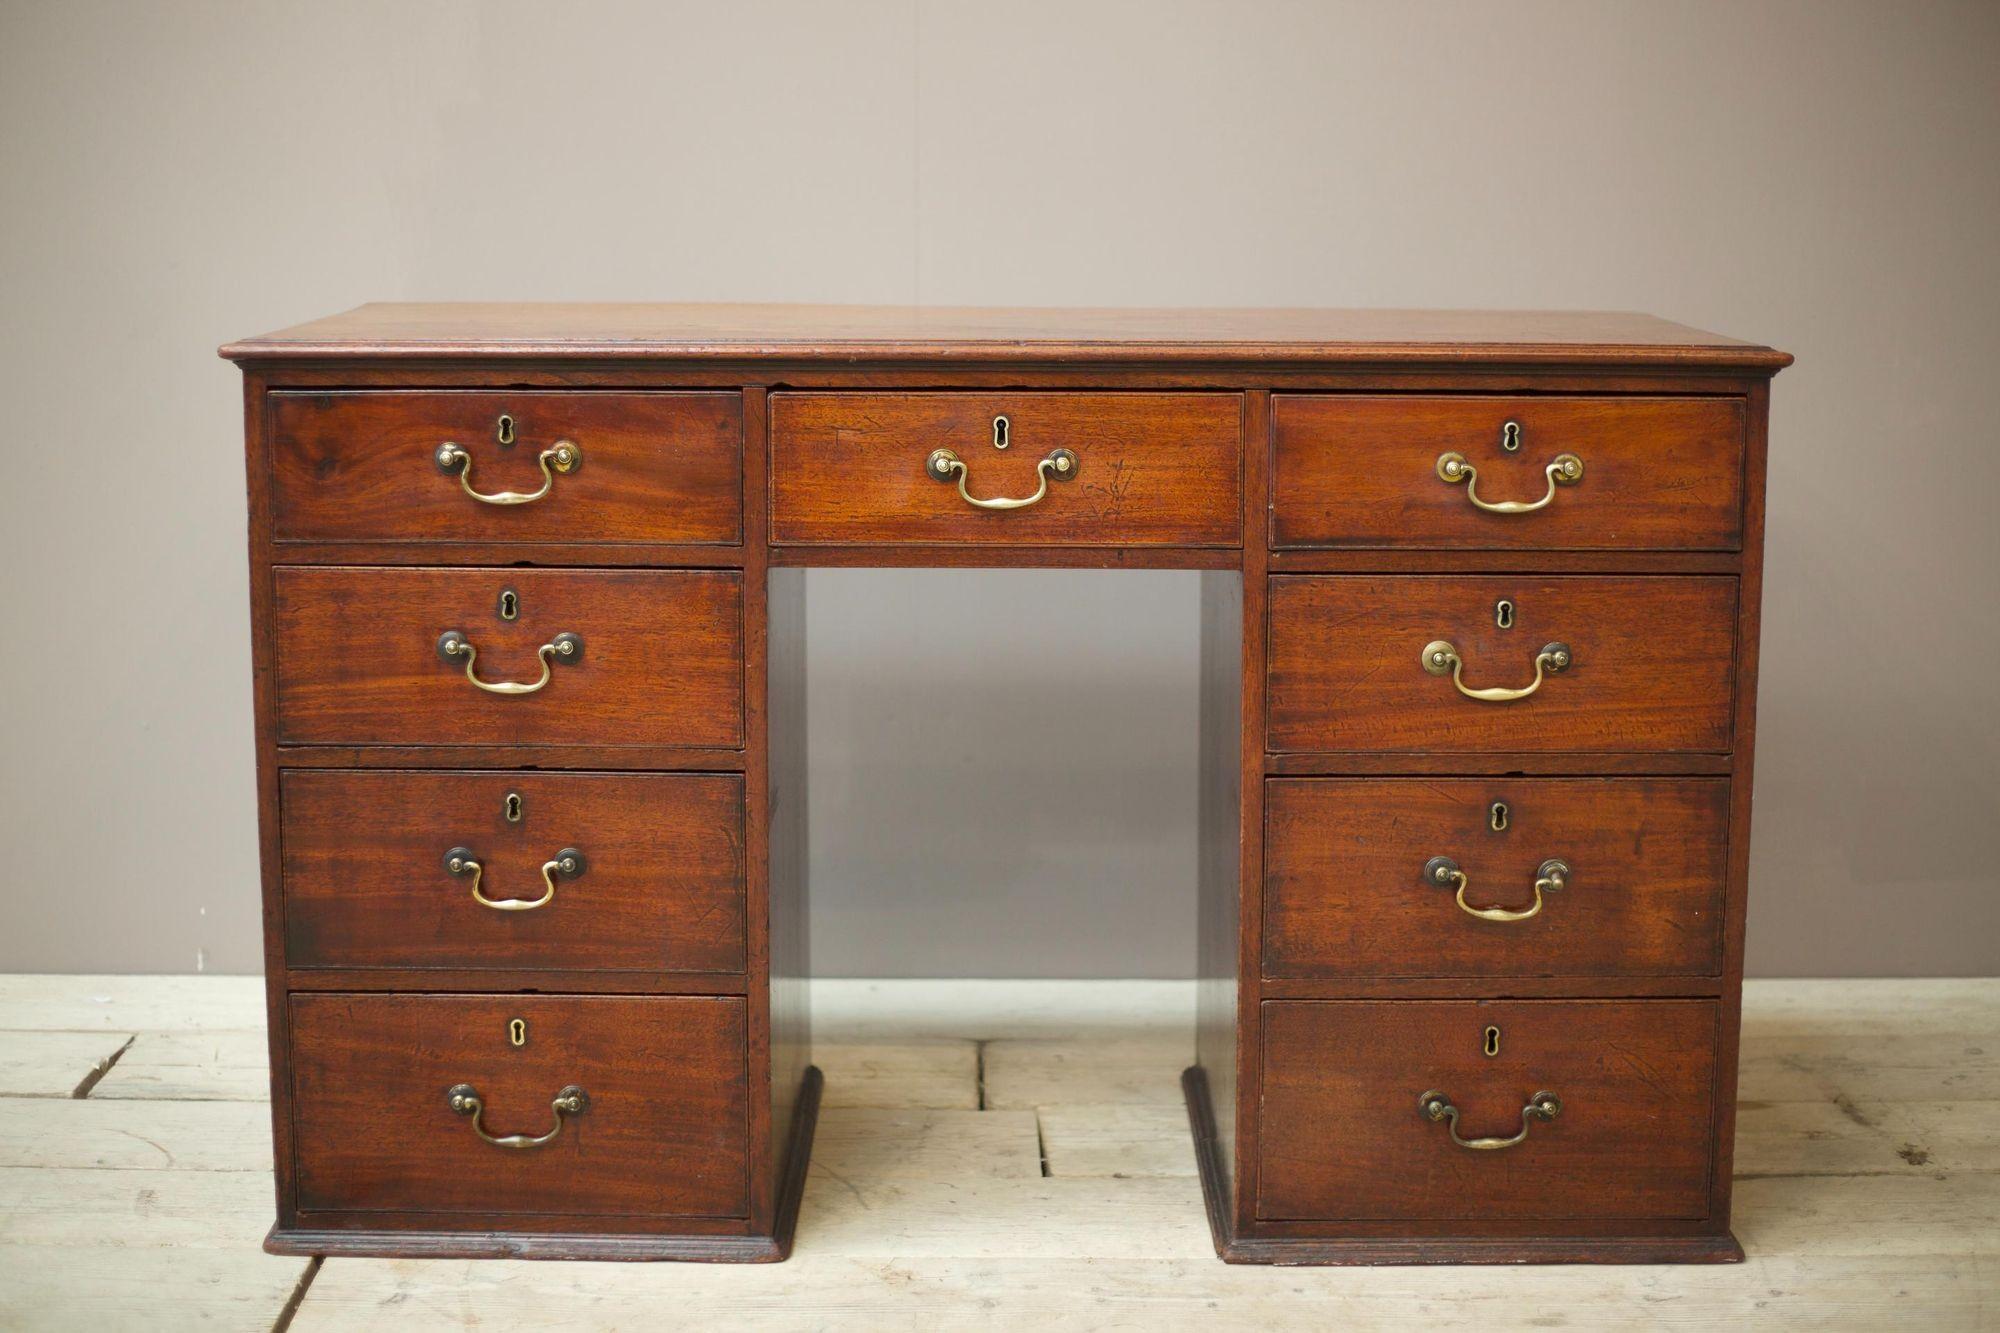 This is a simple very well made Georgian desk. Made from solid mahogany and as far as I can tell totally original. The drawers all run smooth and close flush. The overall condition is very good with attractive age related patina. Good sized desk as